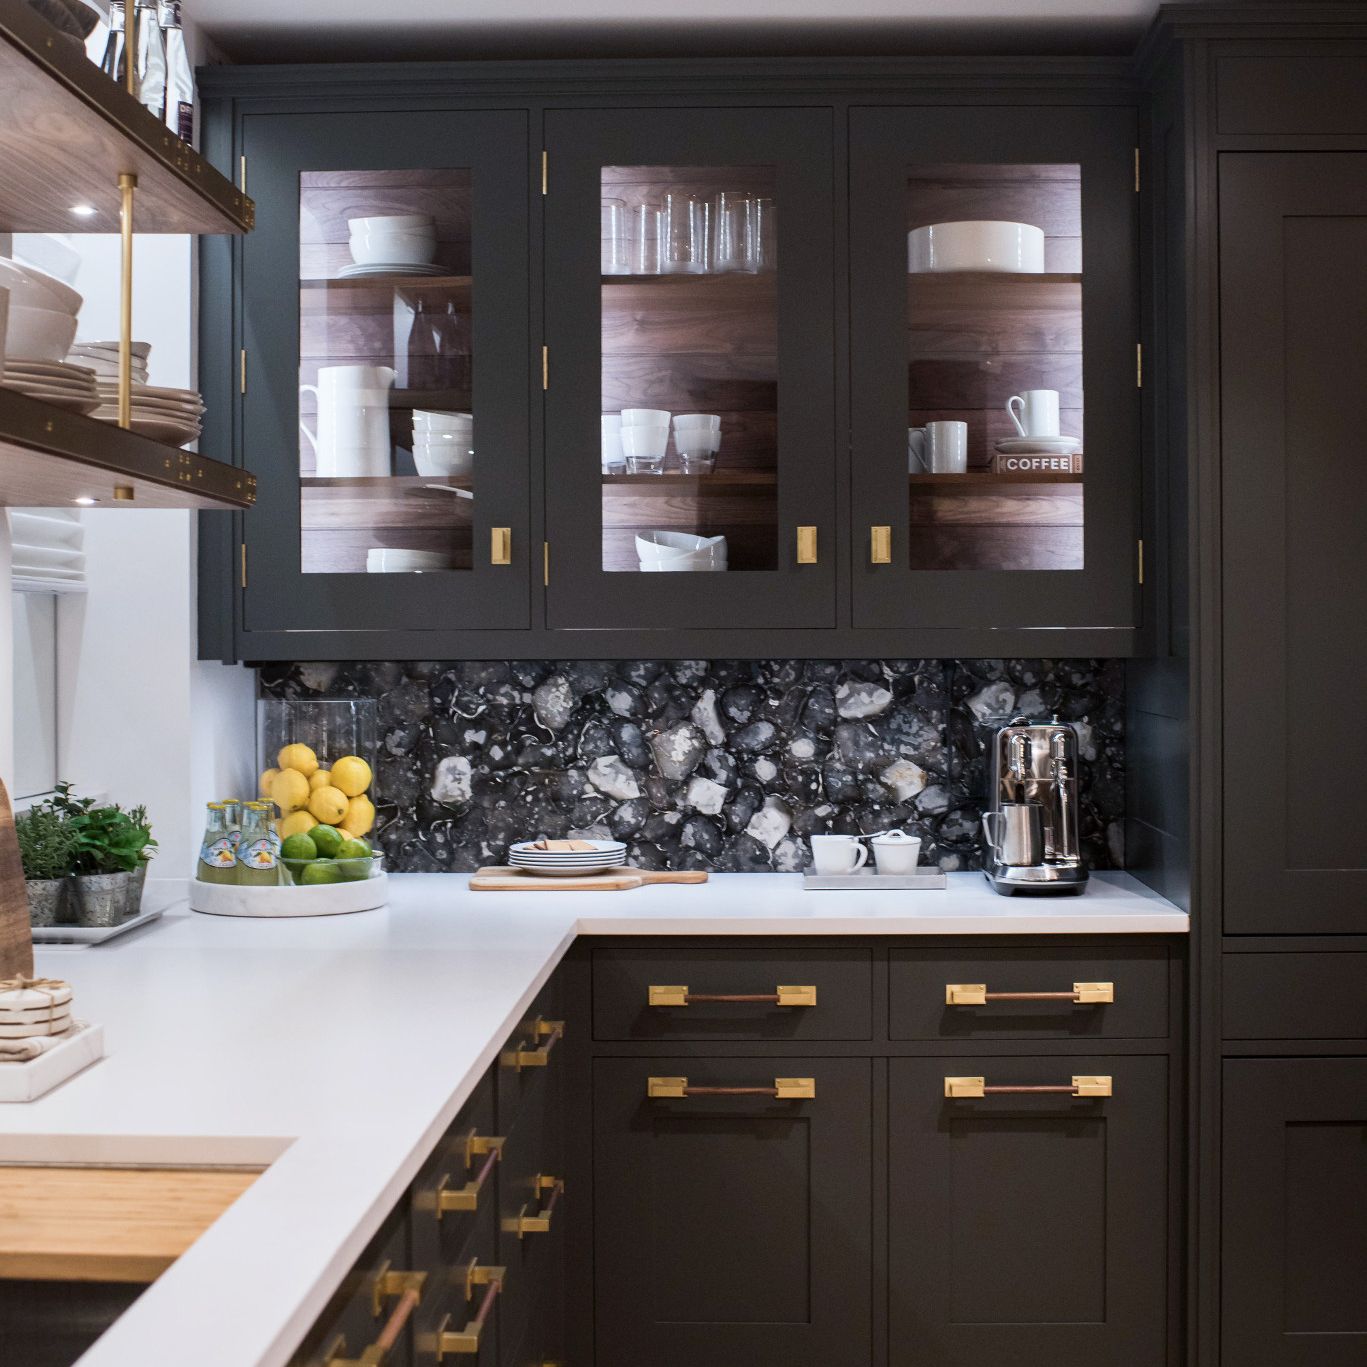 A kitchen with black cabinets

Description automatically generated with medium confidence